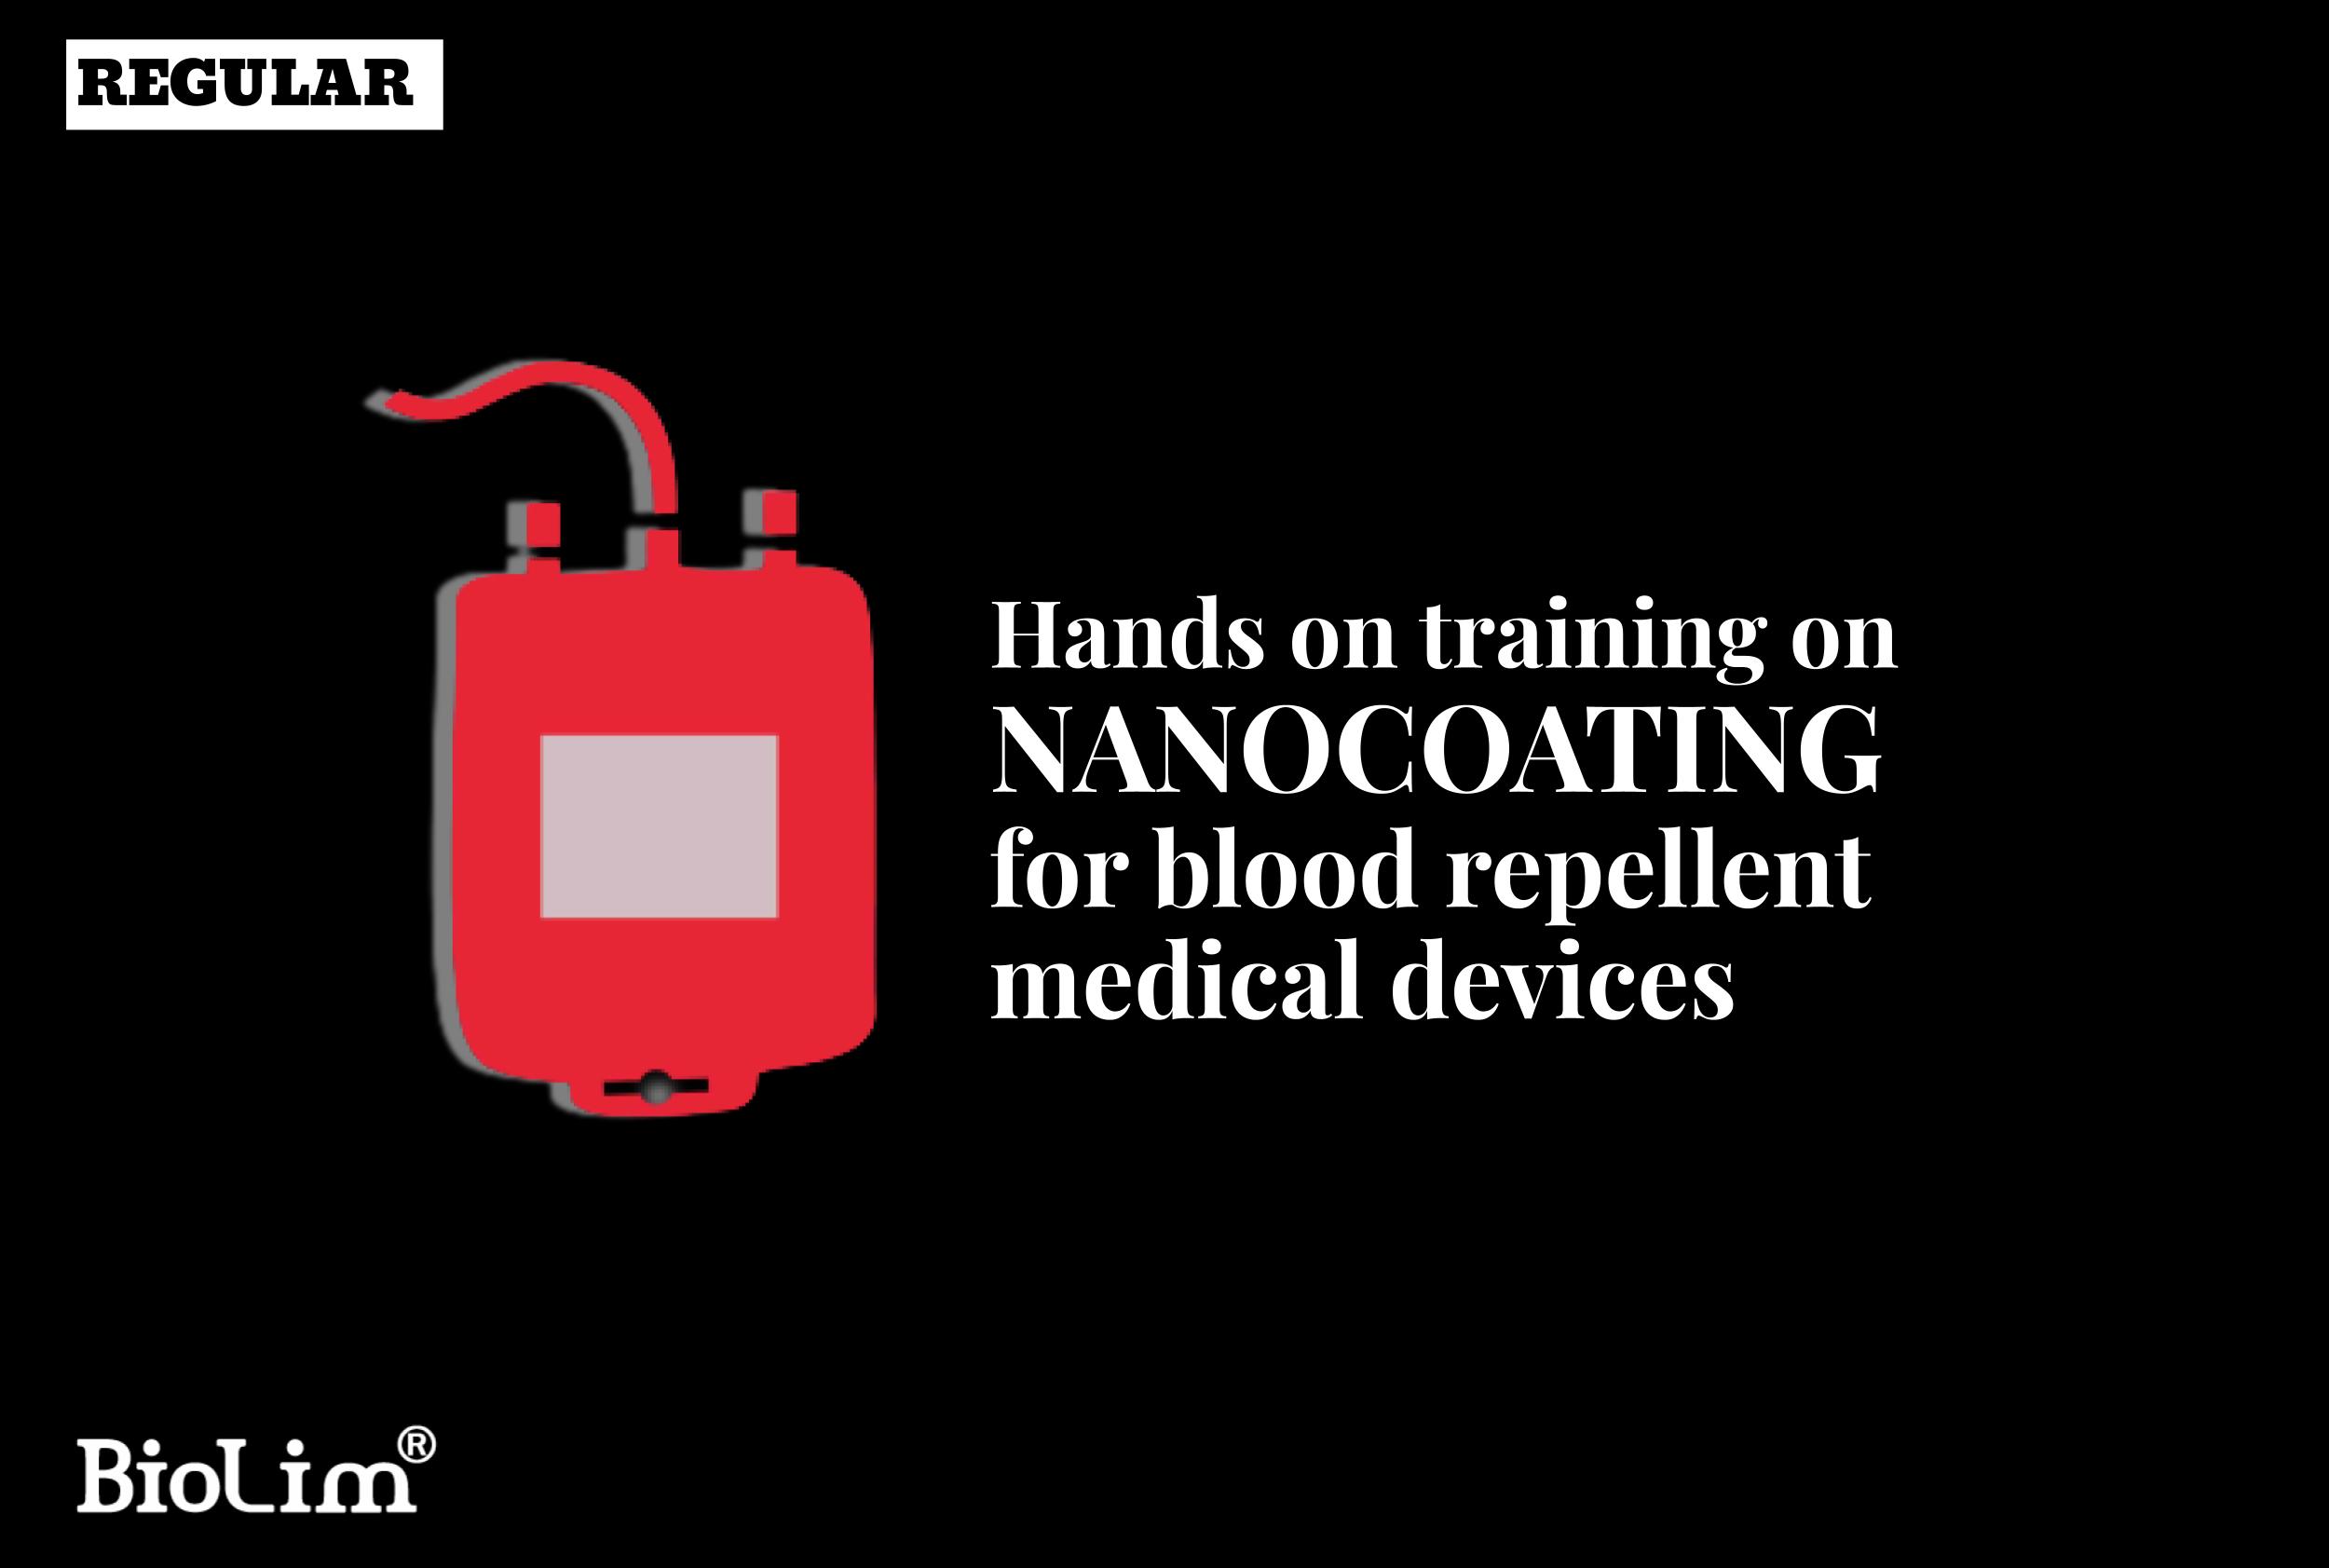 Hands on training on nanocoating for blood repellent medical devices